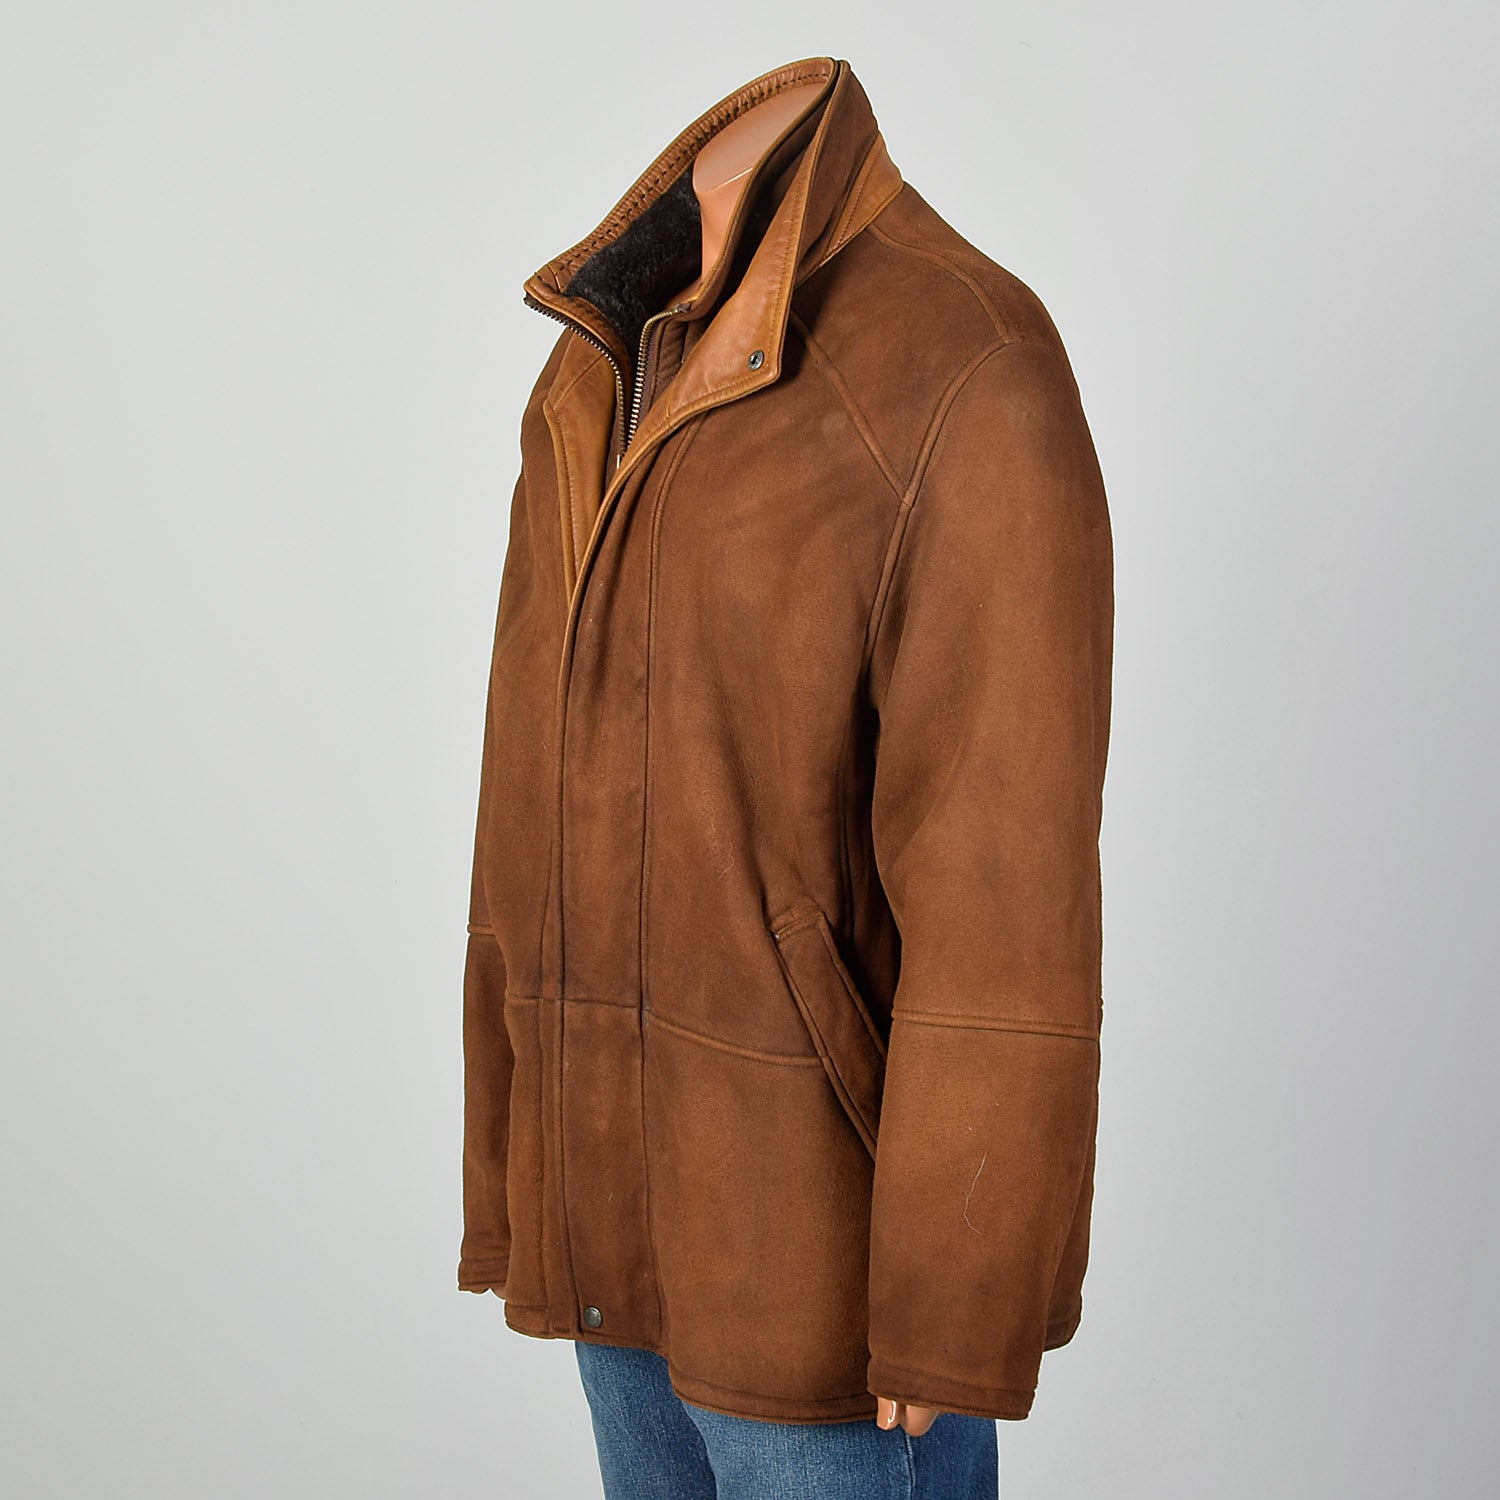 XL-XXl Orvis Bedford Brown Leather Shearling Jacket